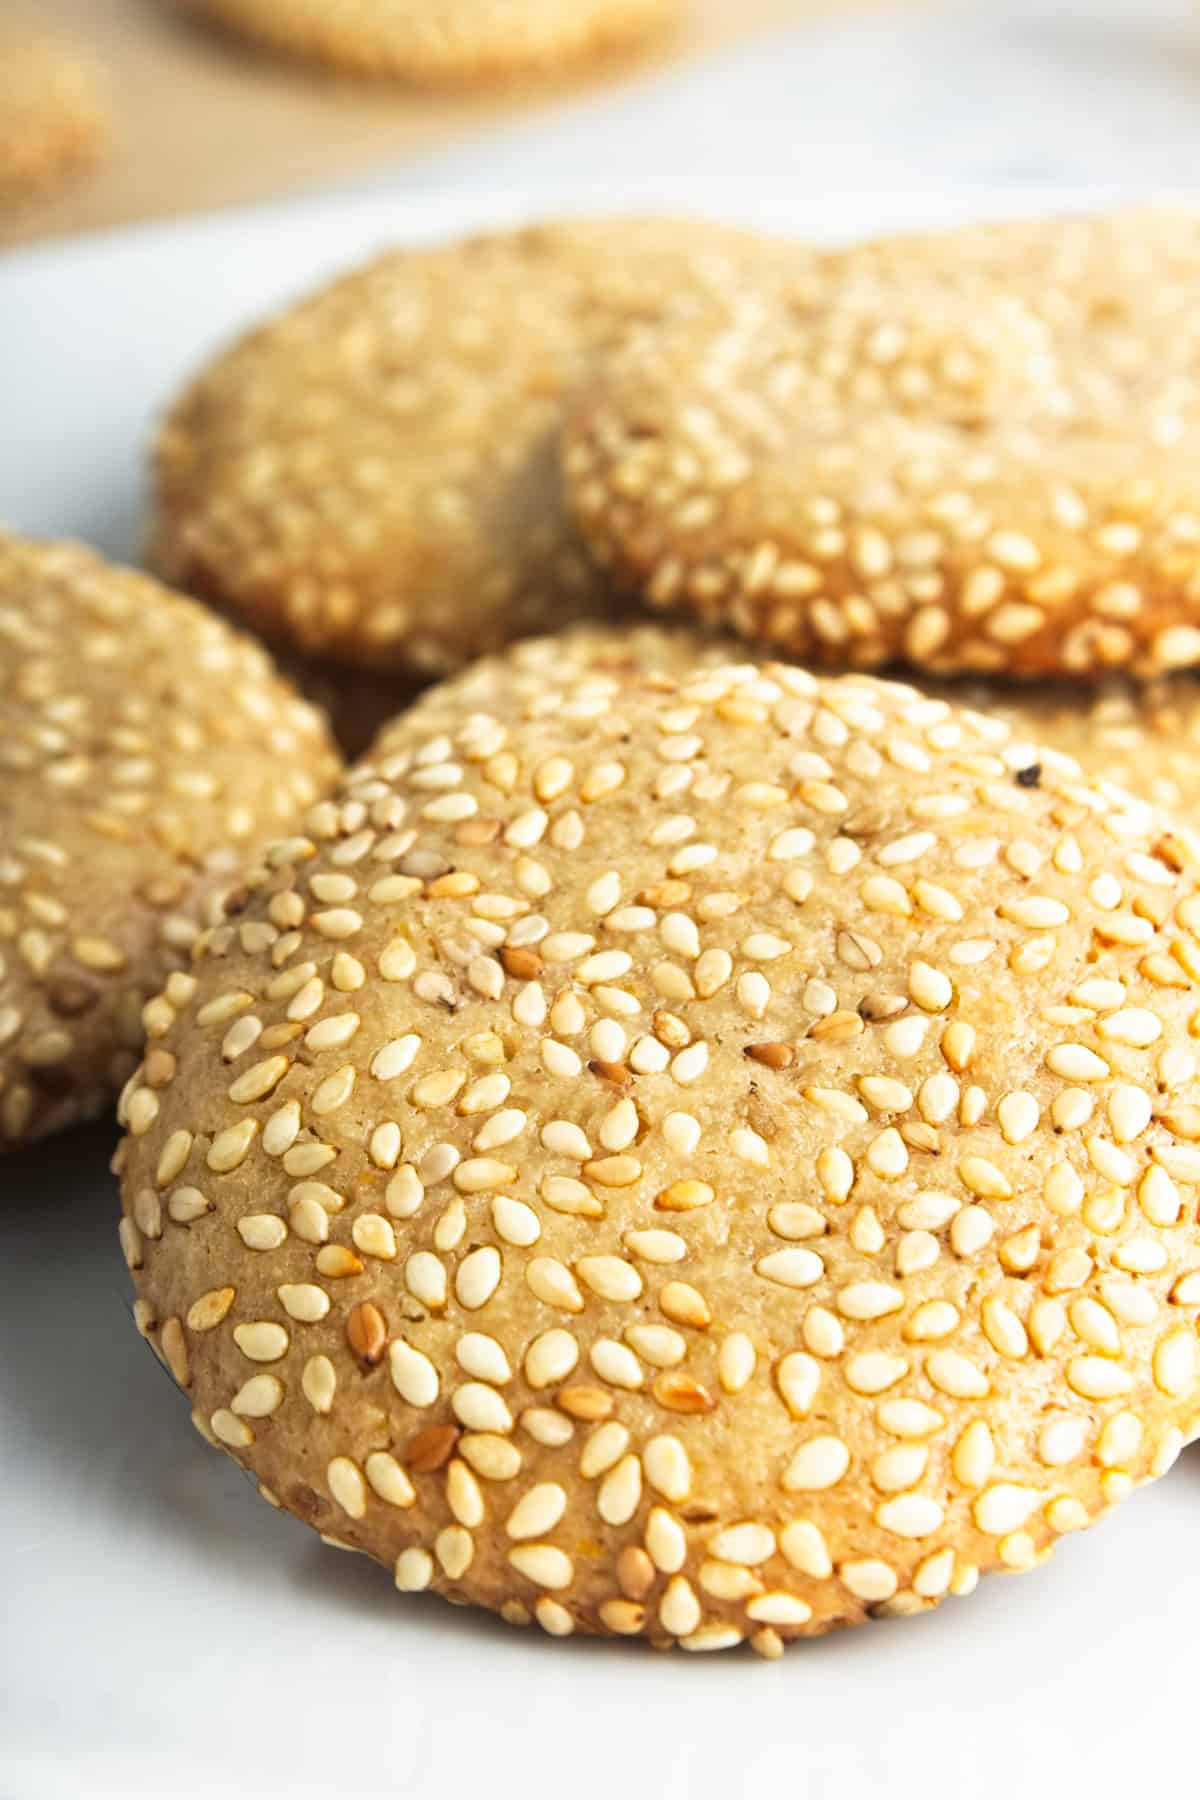 A golden brown cookies covered in seseame seeds.